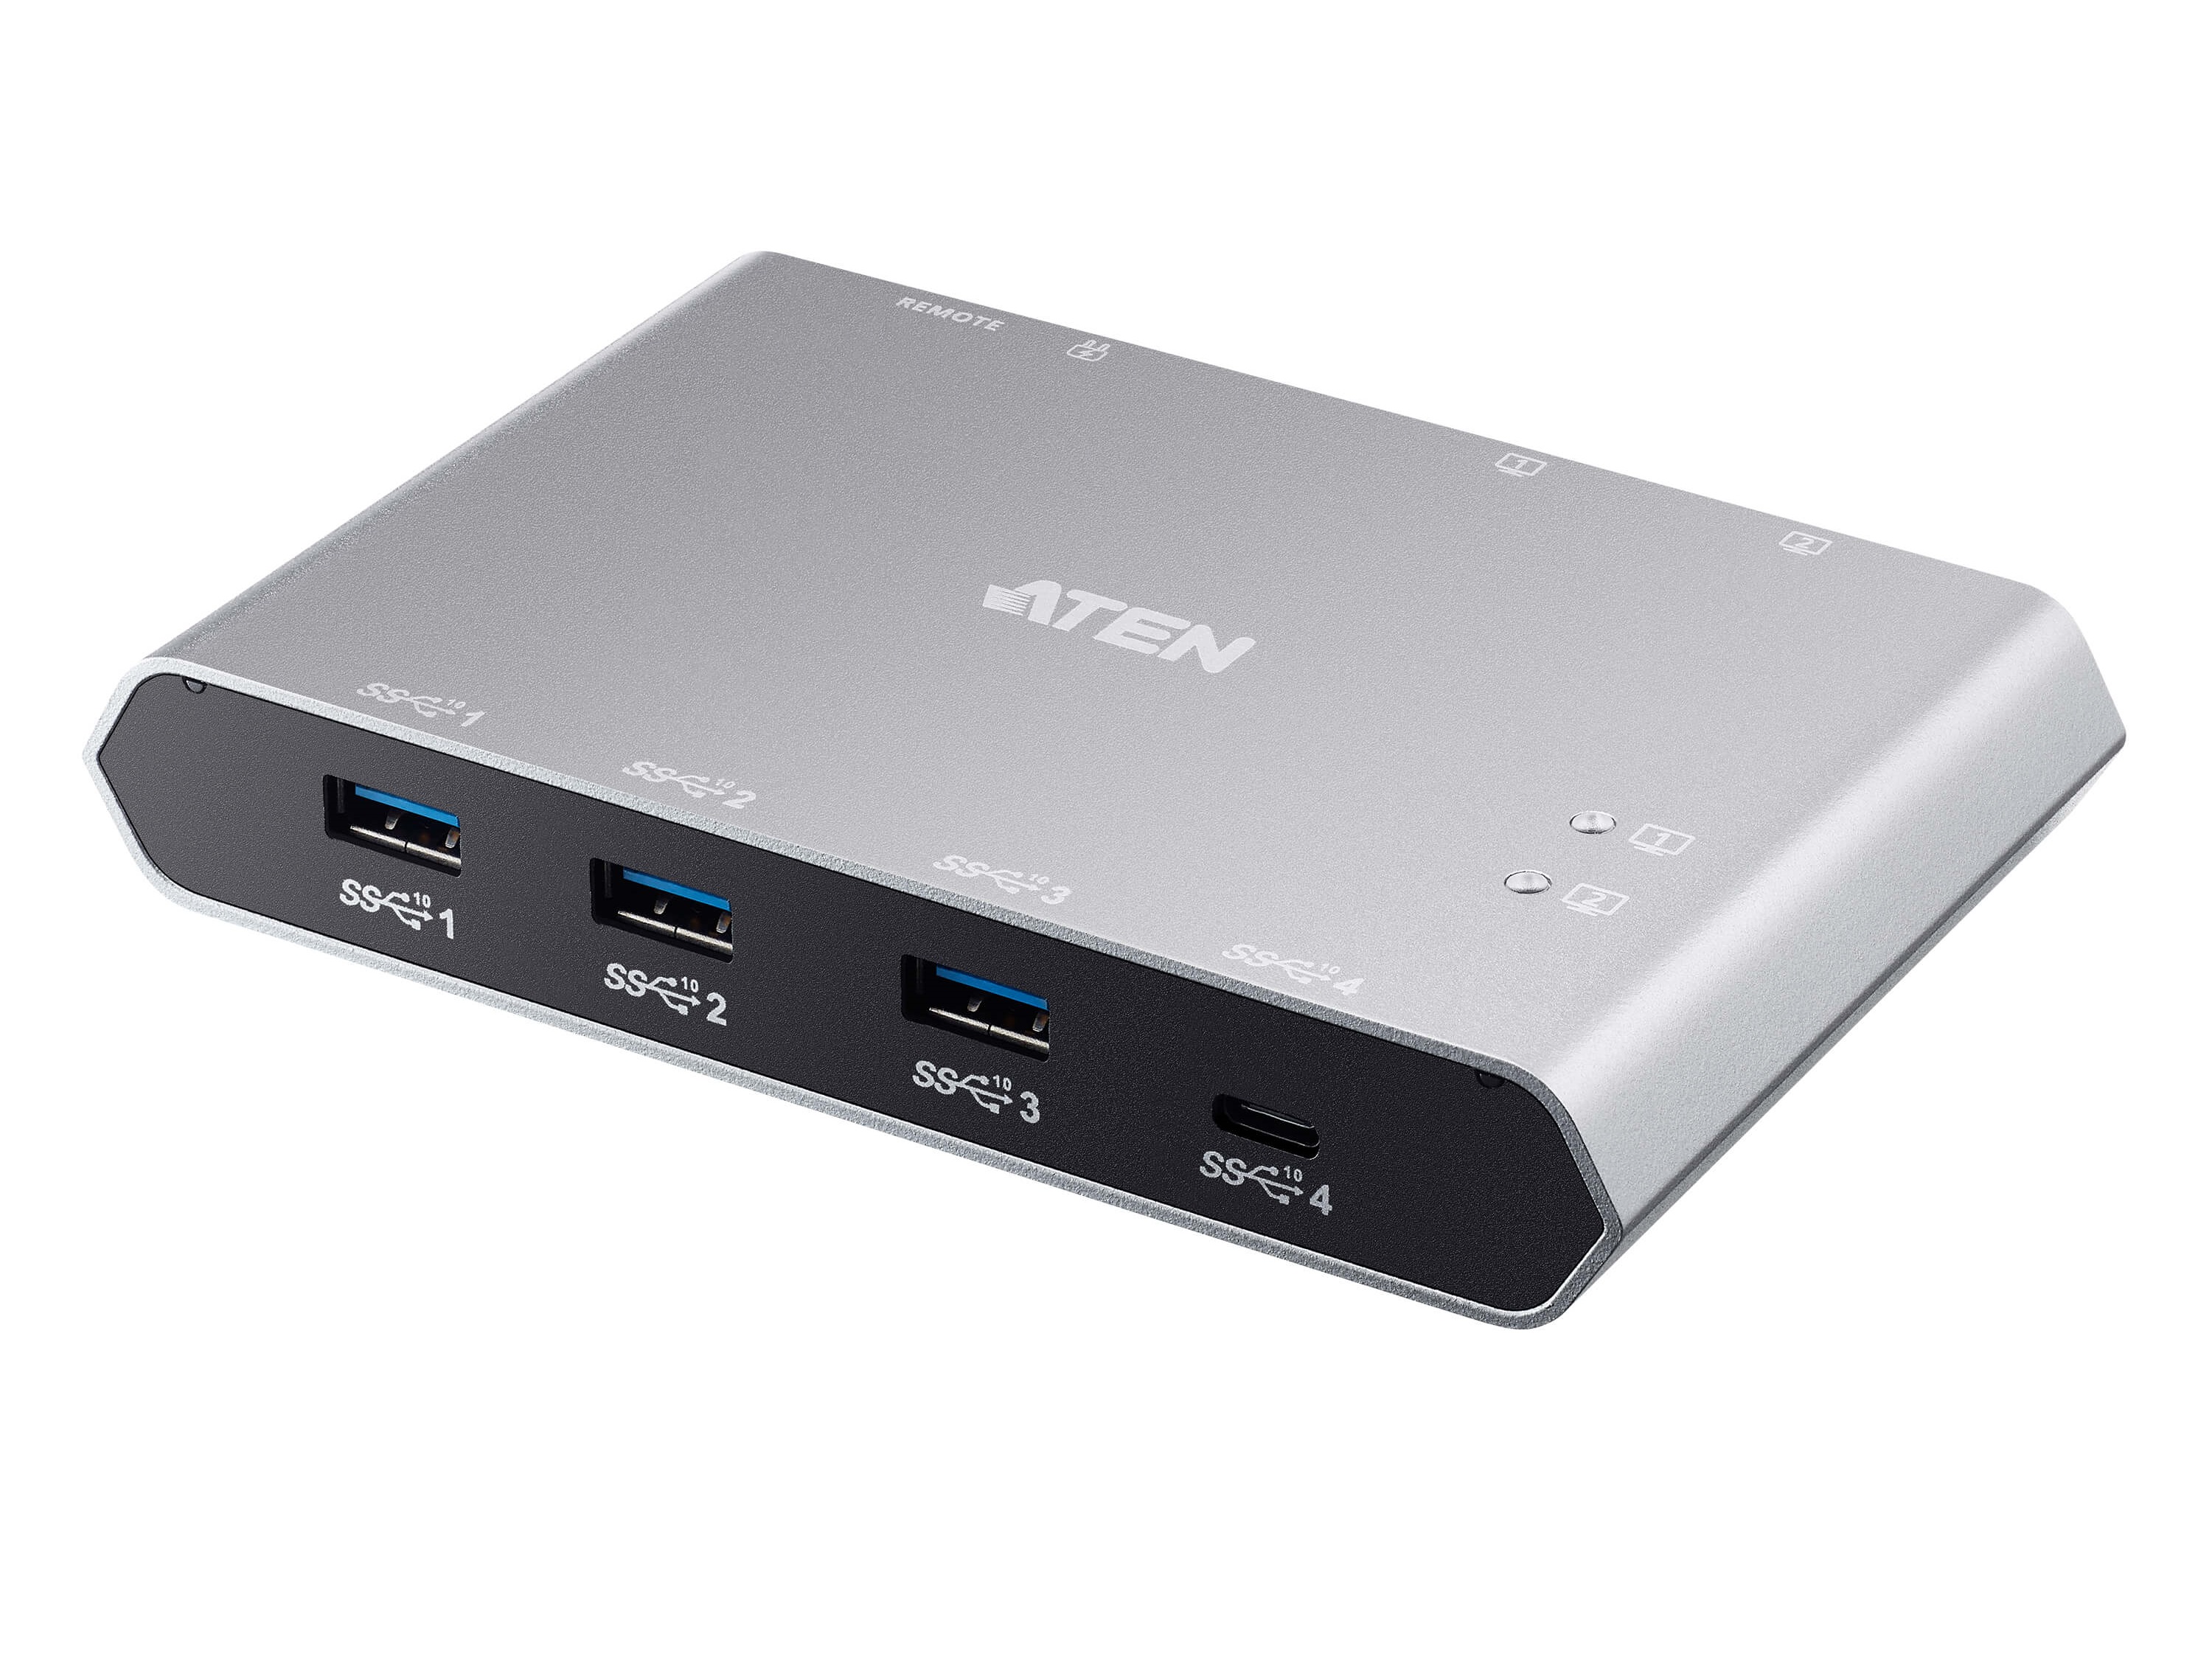 US3342 2-Port USB-C Gen 2 Sharing Switch with Power Pass-through by Aten